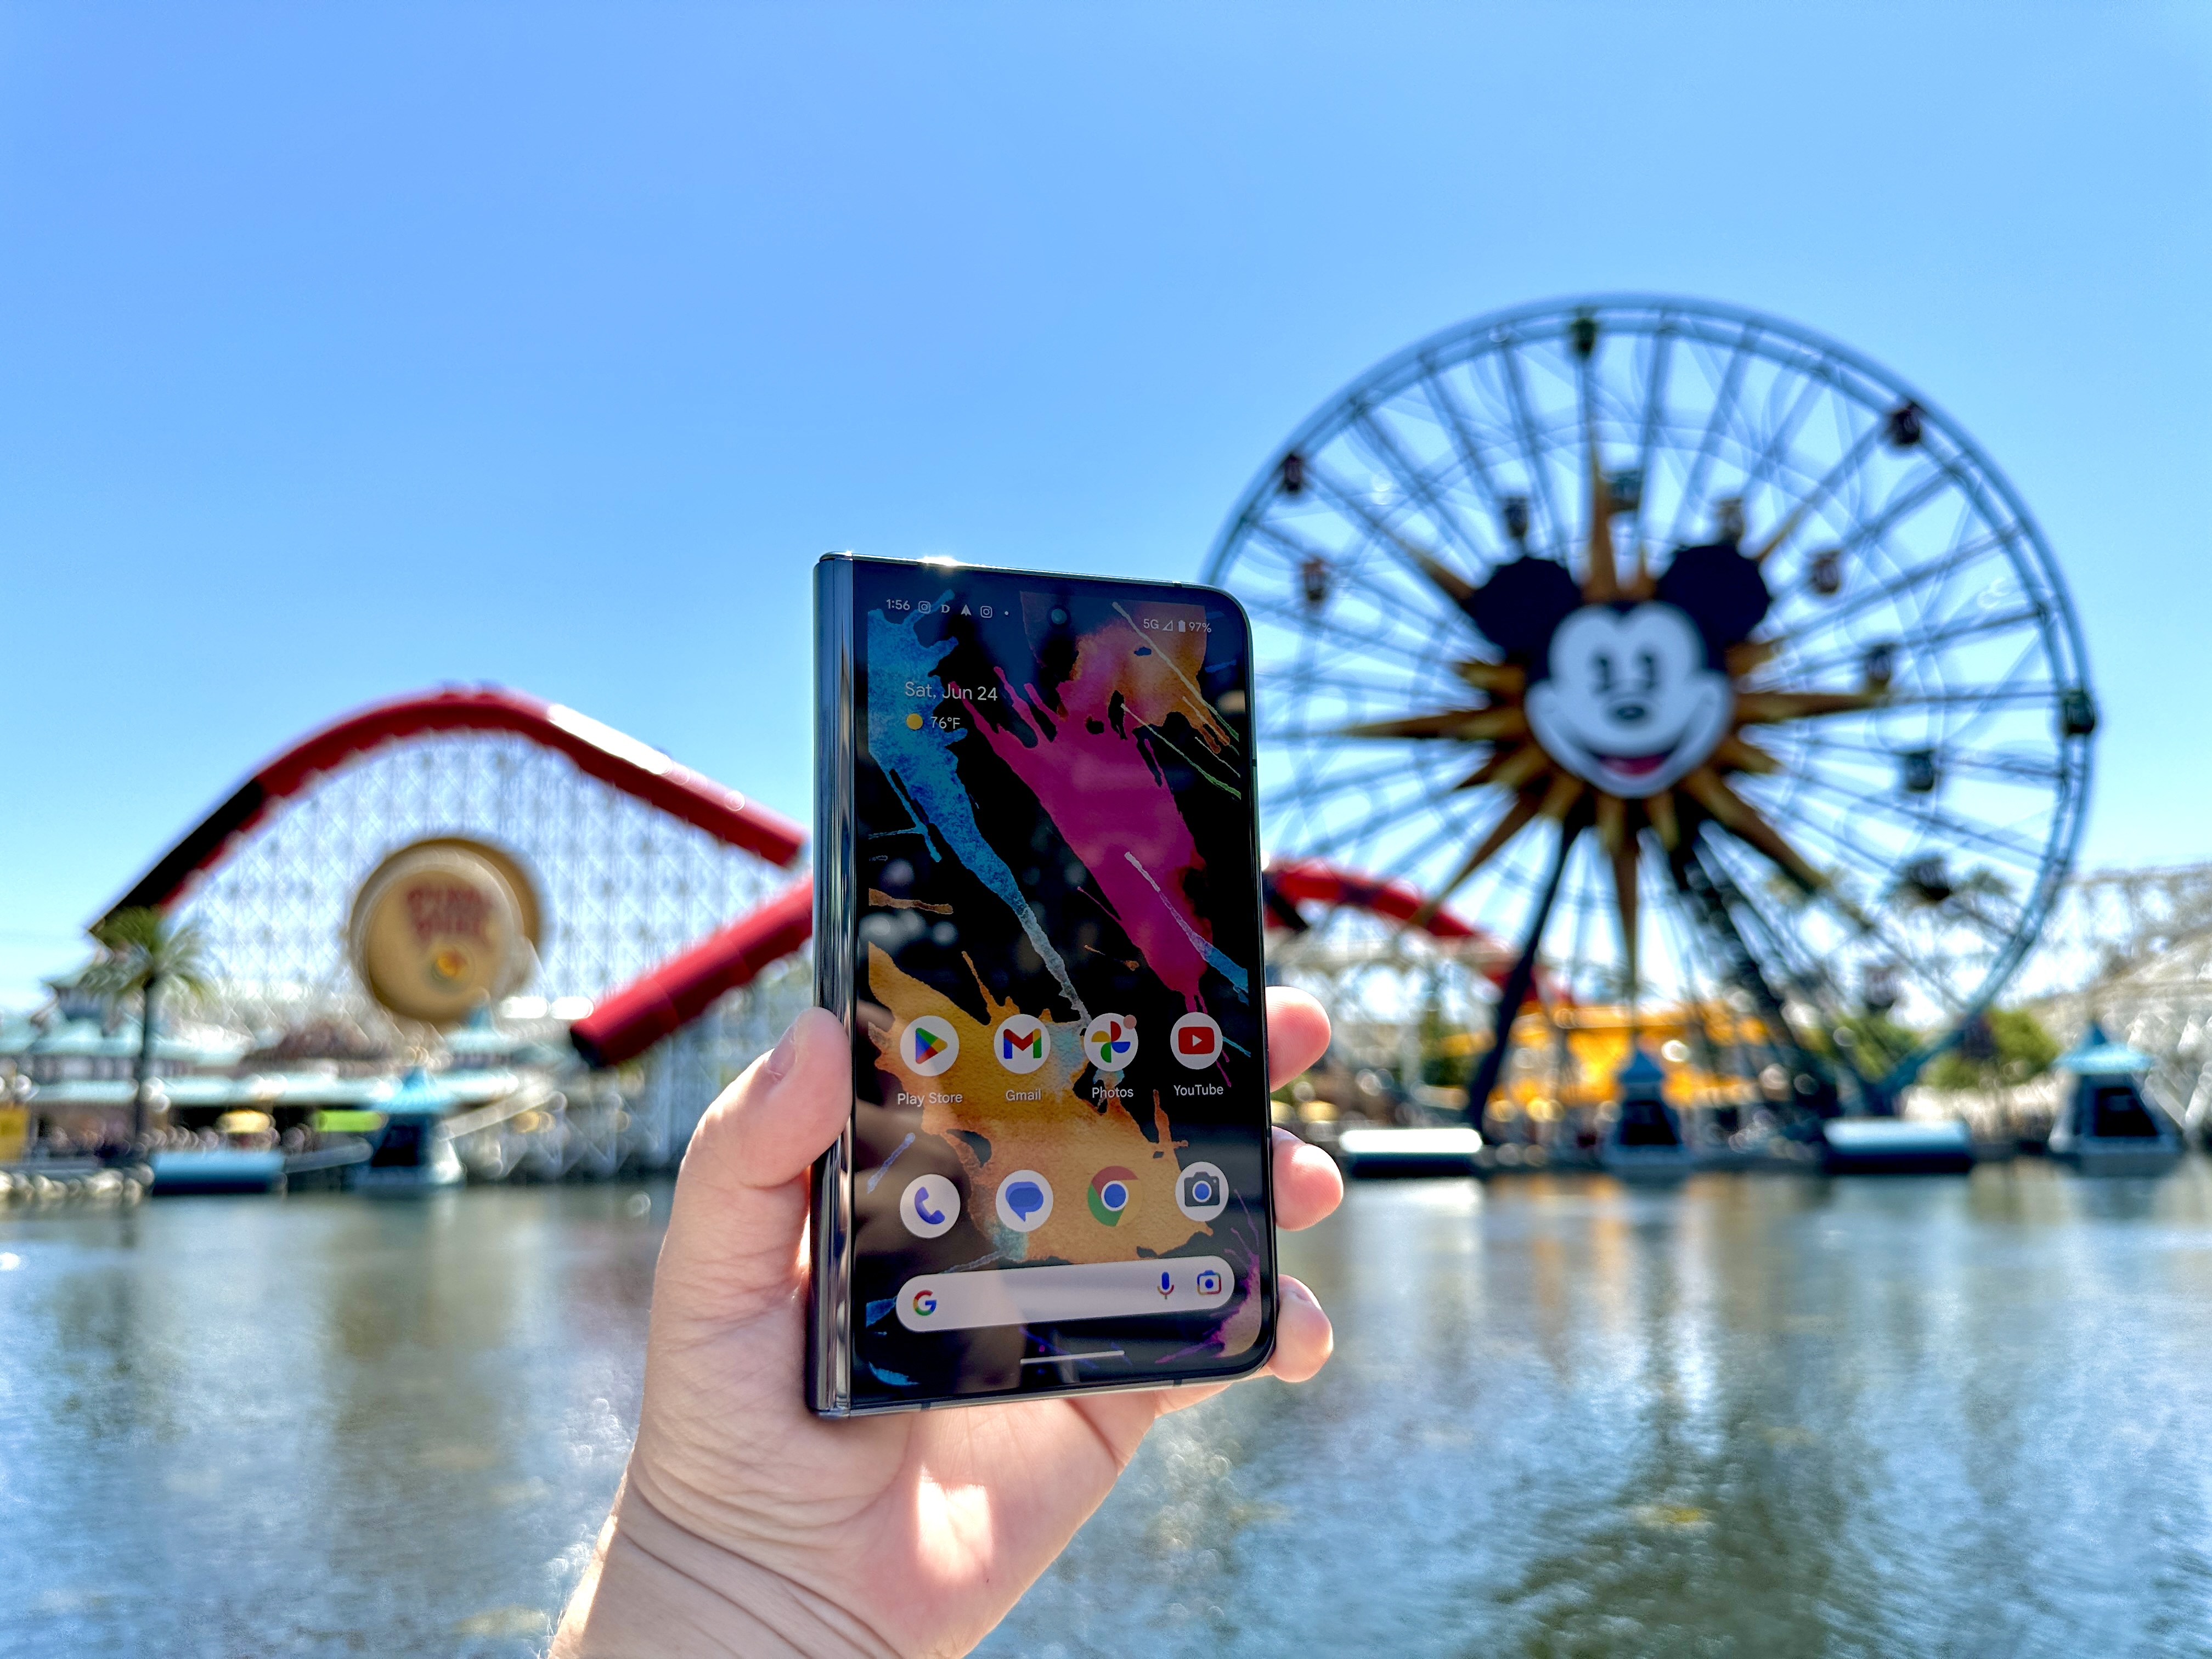 Google Pixel Fold in Obsidian held in hand showing home screen at Pixar Pier.